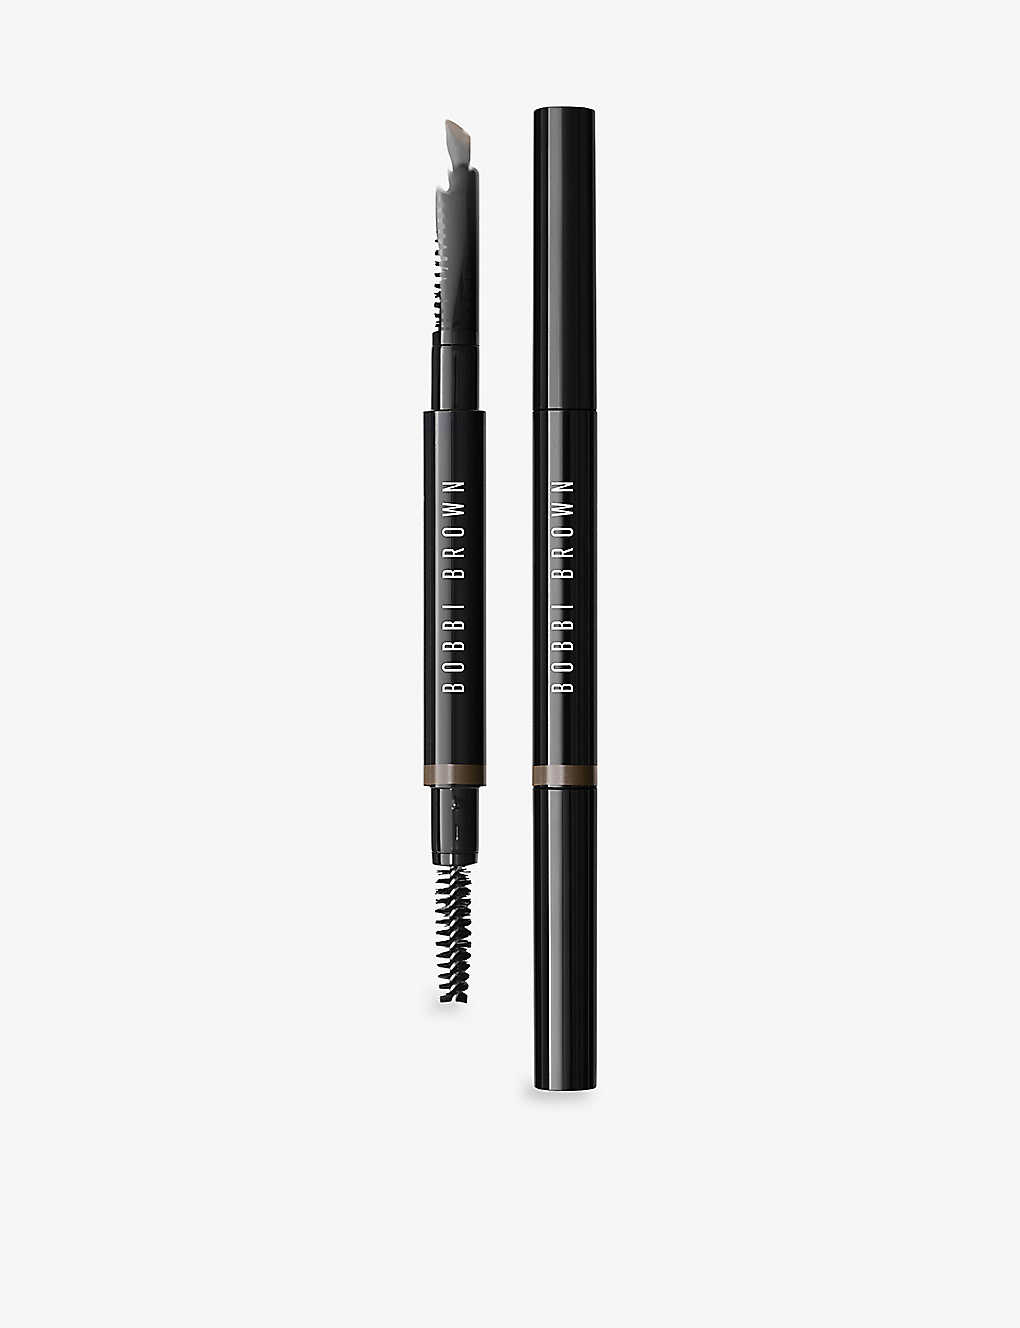 Bobbi Brown Blonde Perfectly Defined Long-wear Brow Pencil 1.15g